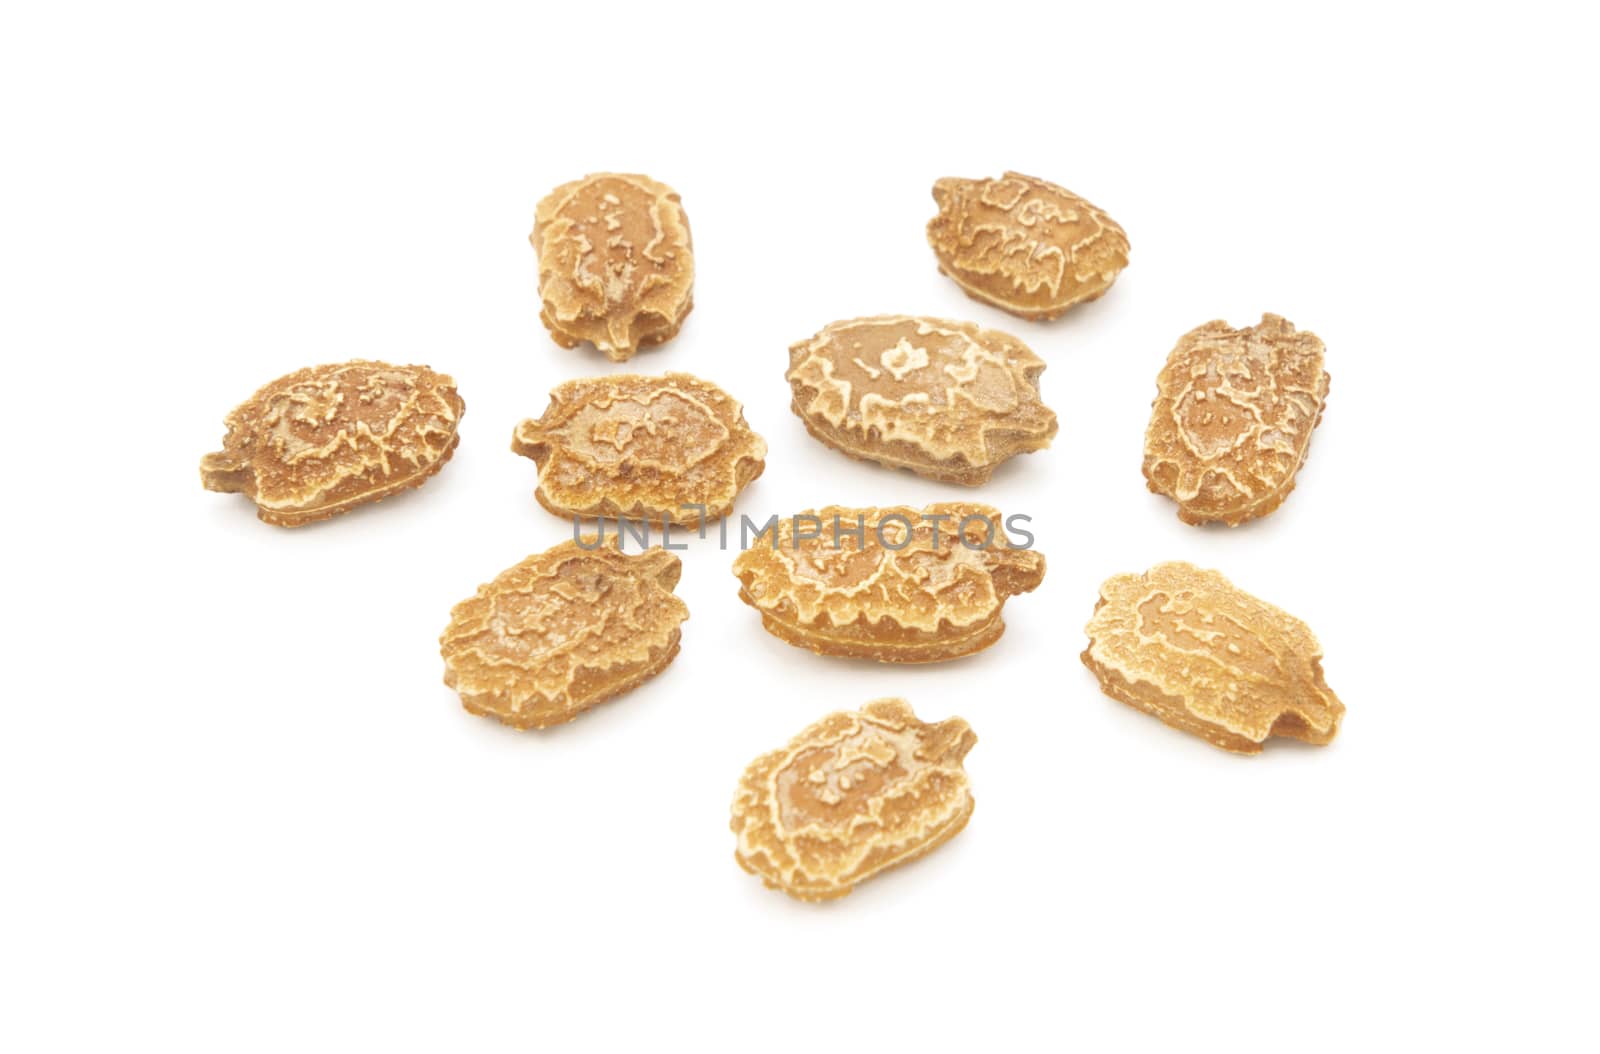 Bitter melon seeds - momordica charantia - unusual shape and markings, roughly 1cm long on white background